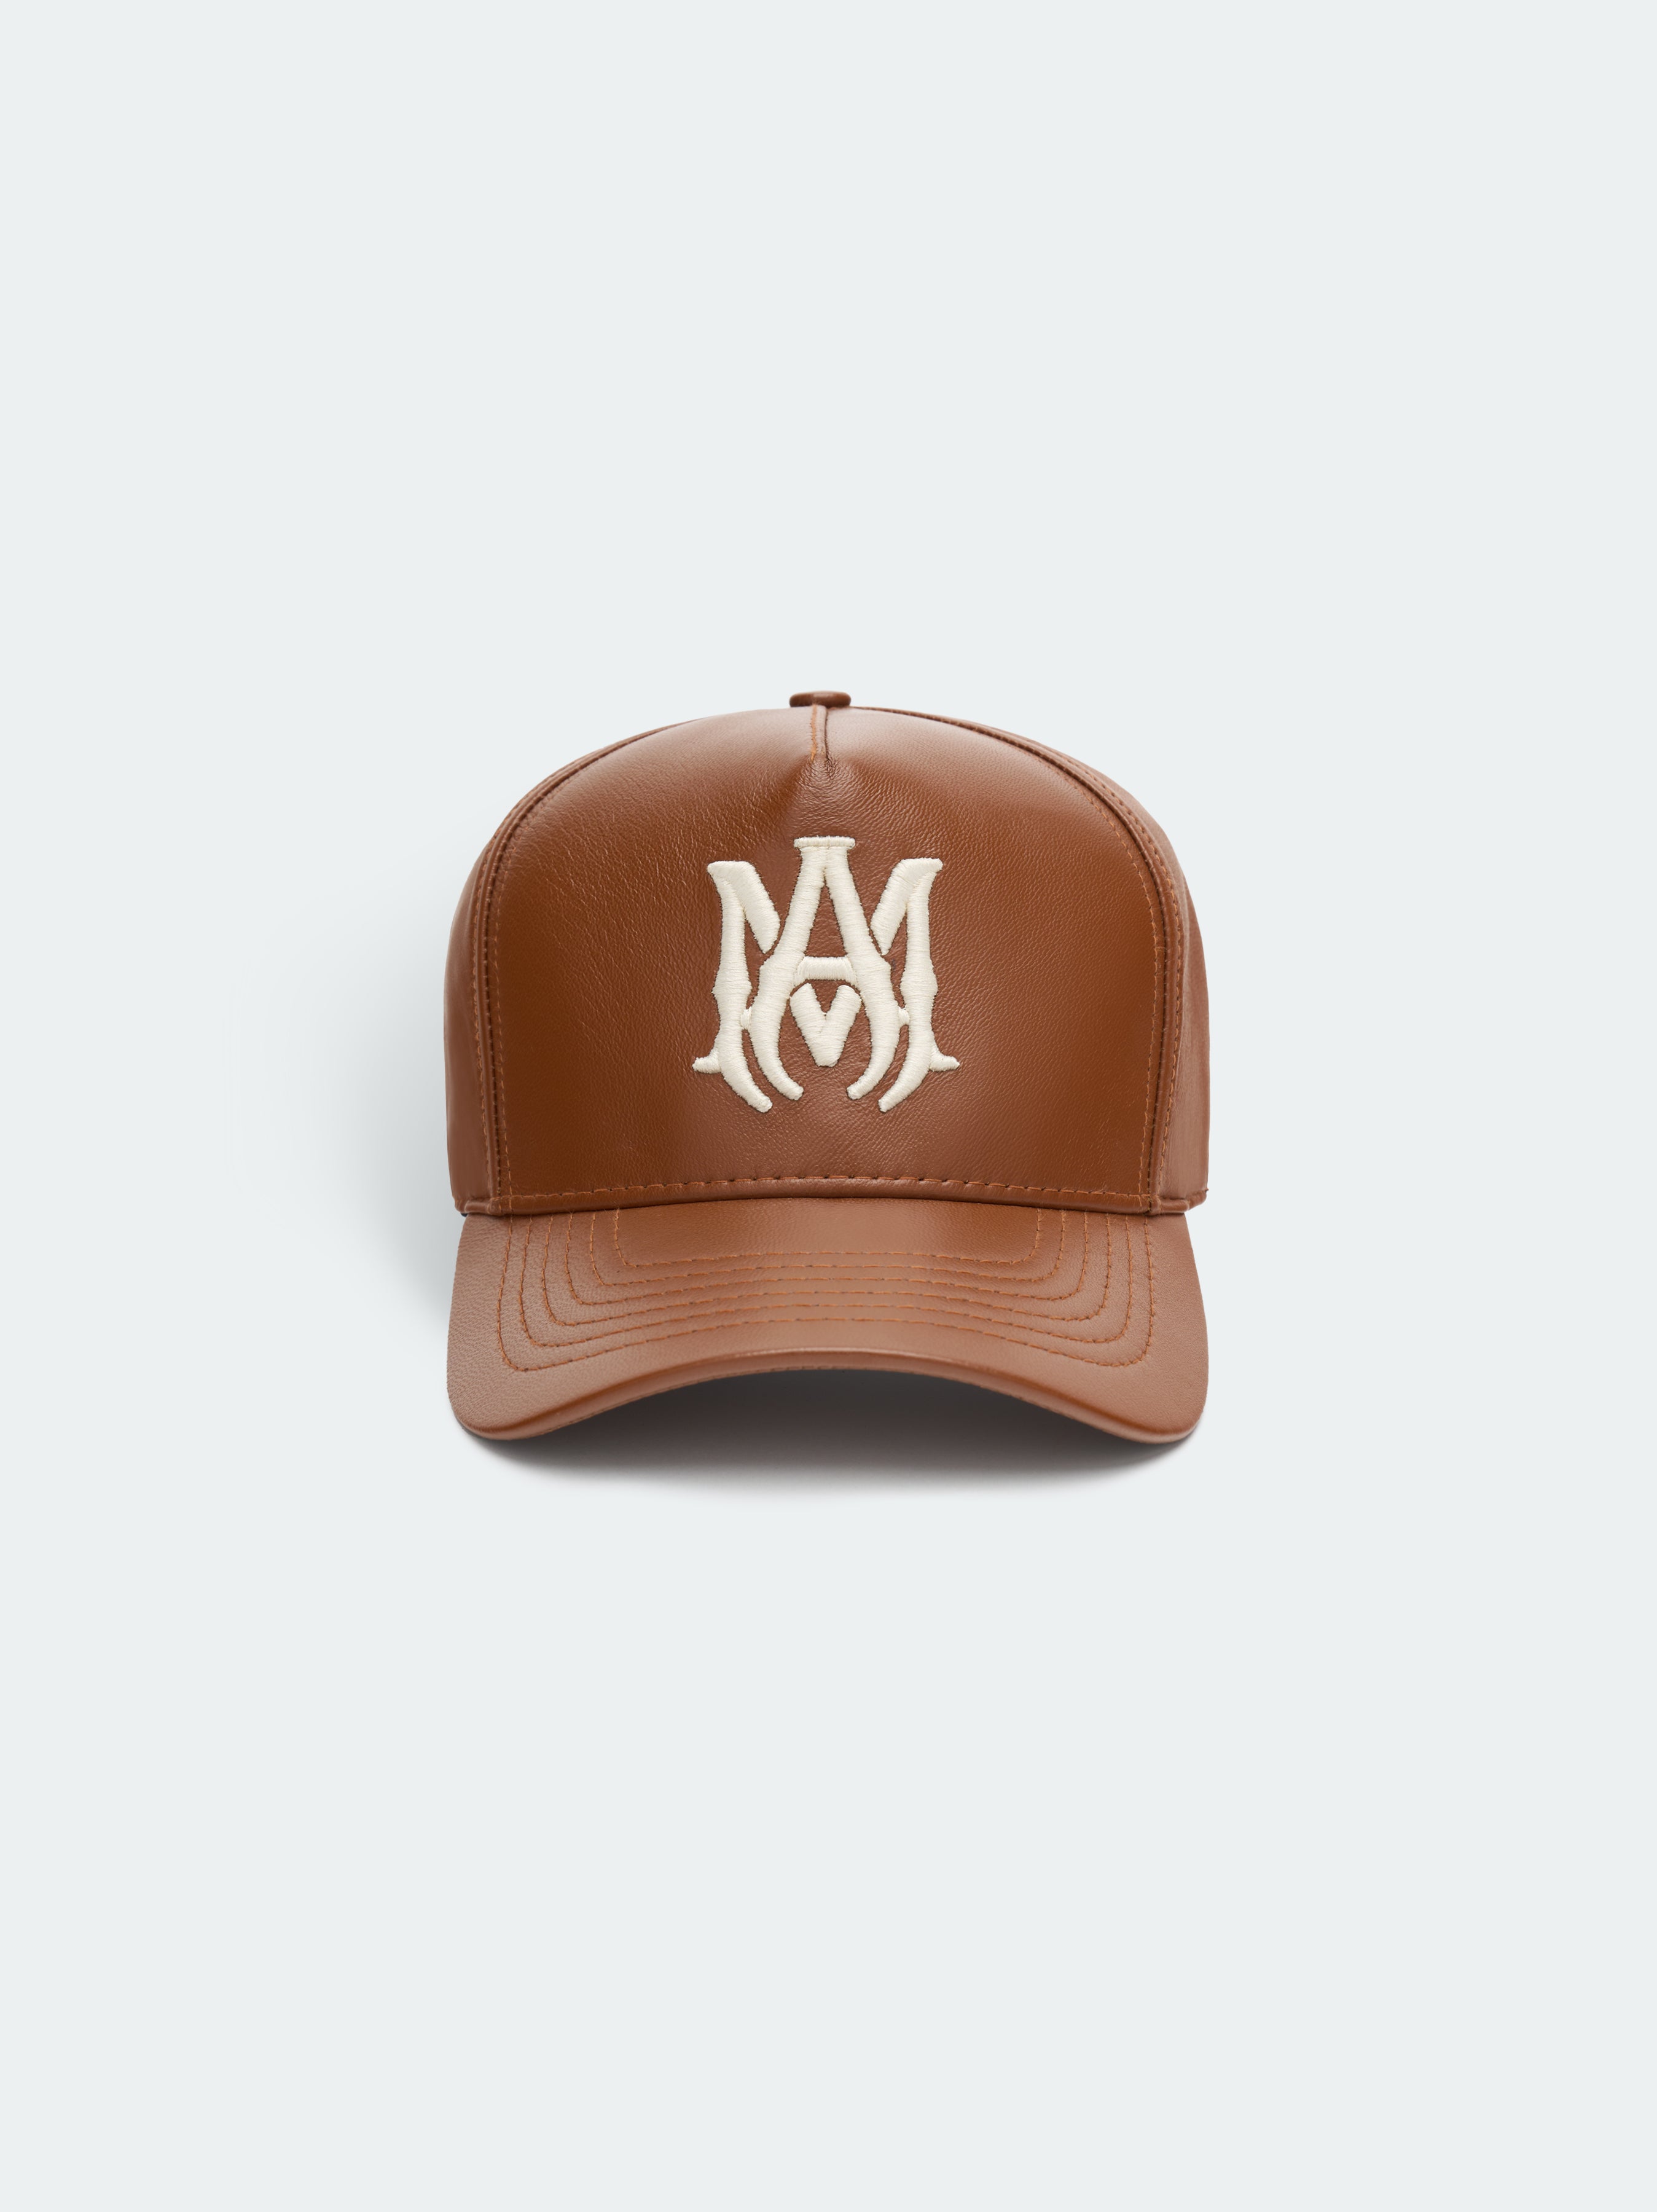 Product MA FULL LEATHER HAT - Brown featured image